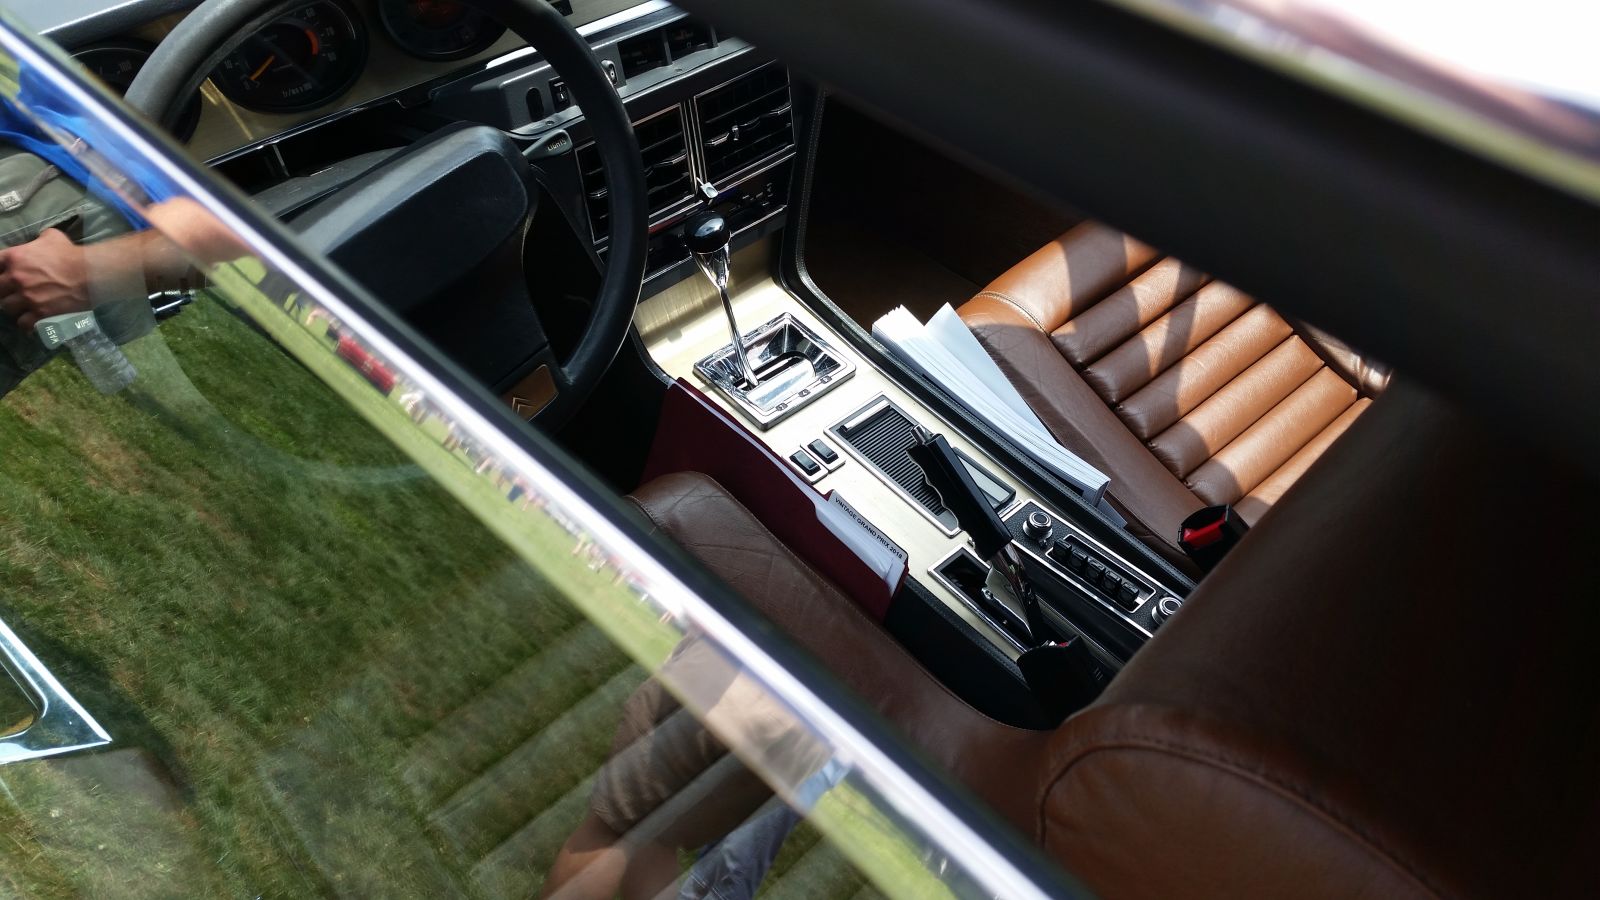 The 5-speed shifter of the above SM